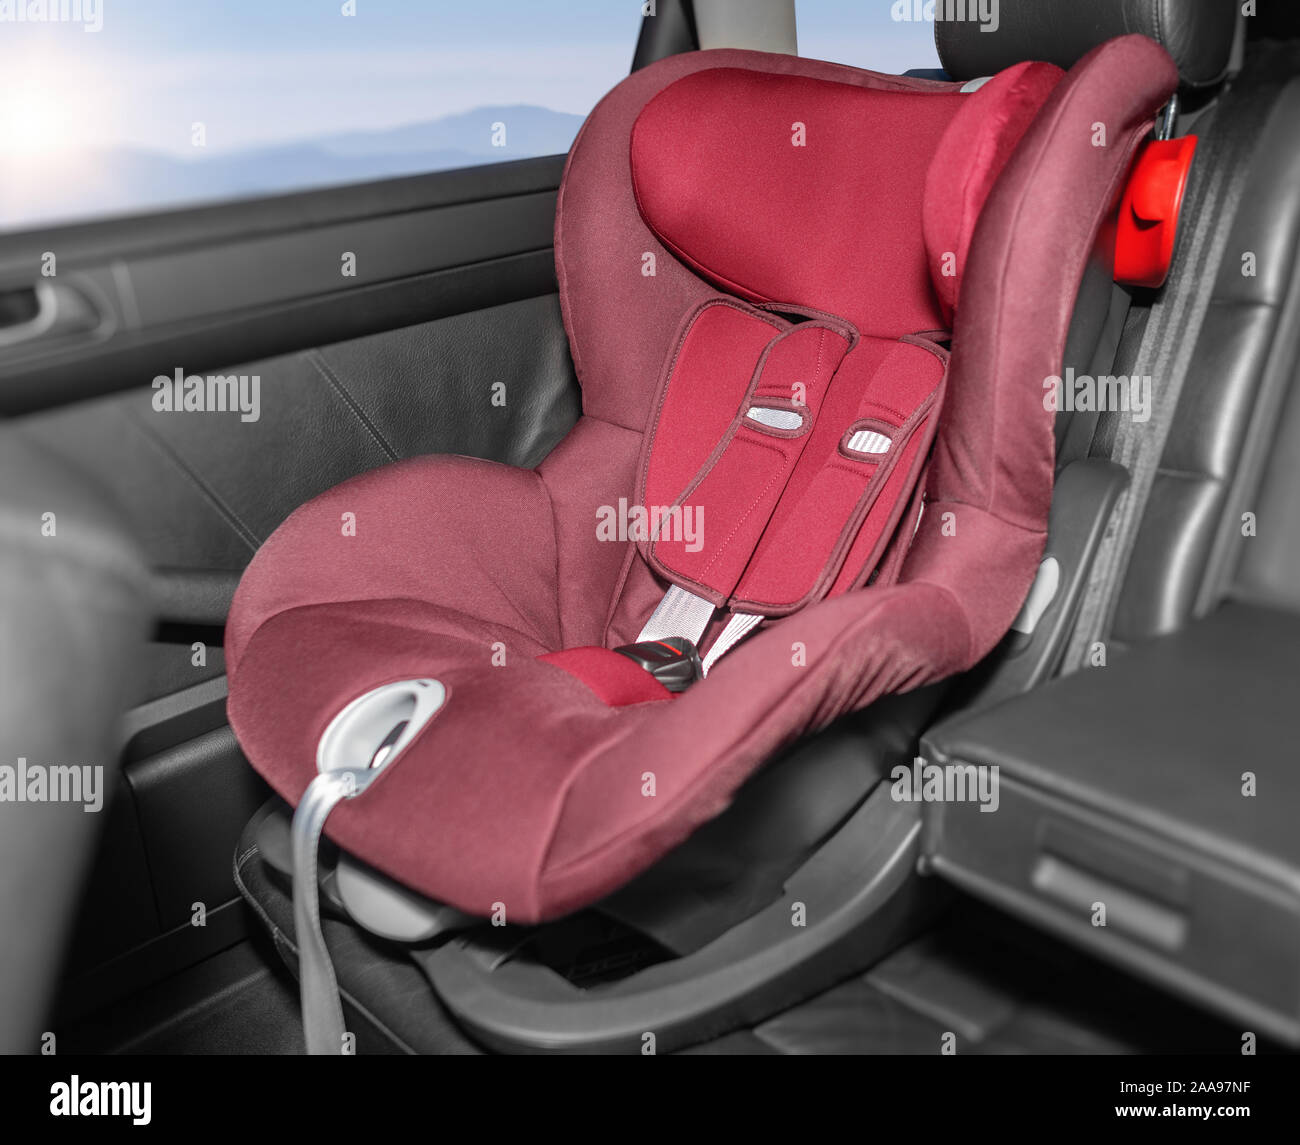 Children's car seat in the car. Stock Photo